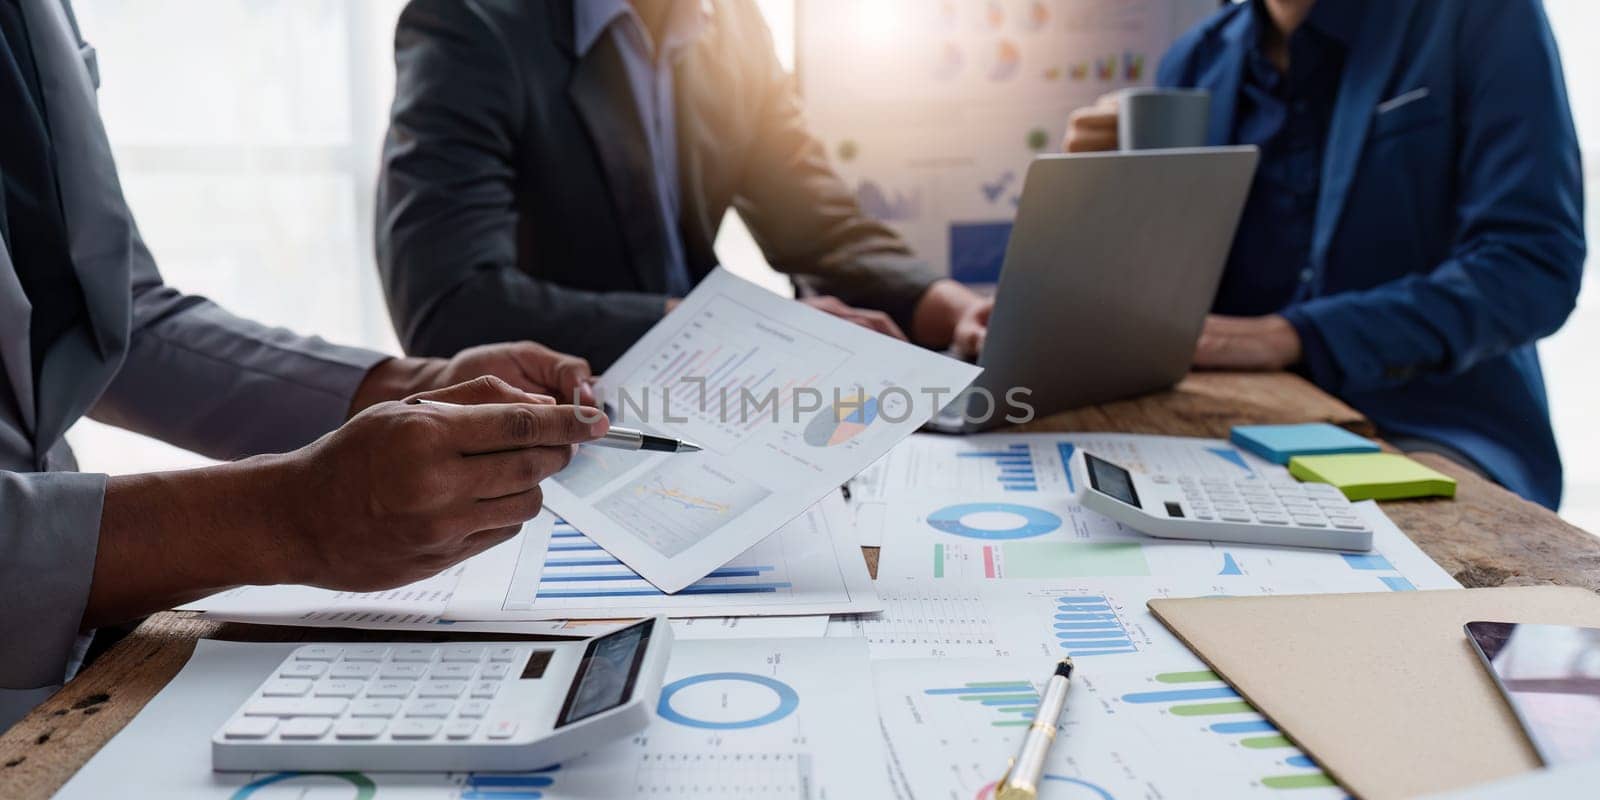 Group of Business People Meeting analysis financial plan, discussion, research with paperwork at office, accounting concept.